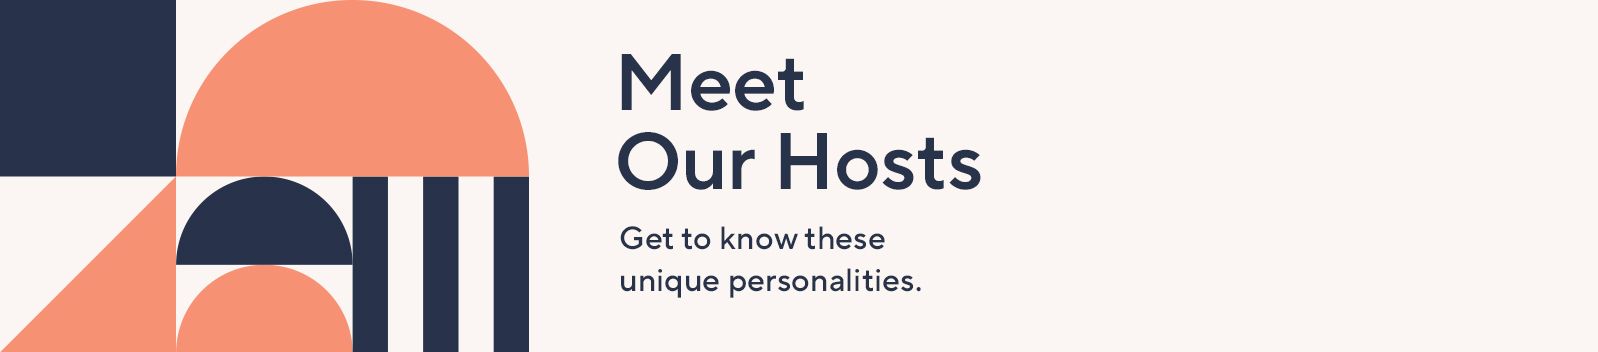 Meet Our Hosts.  Get to know these unique personalities.